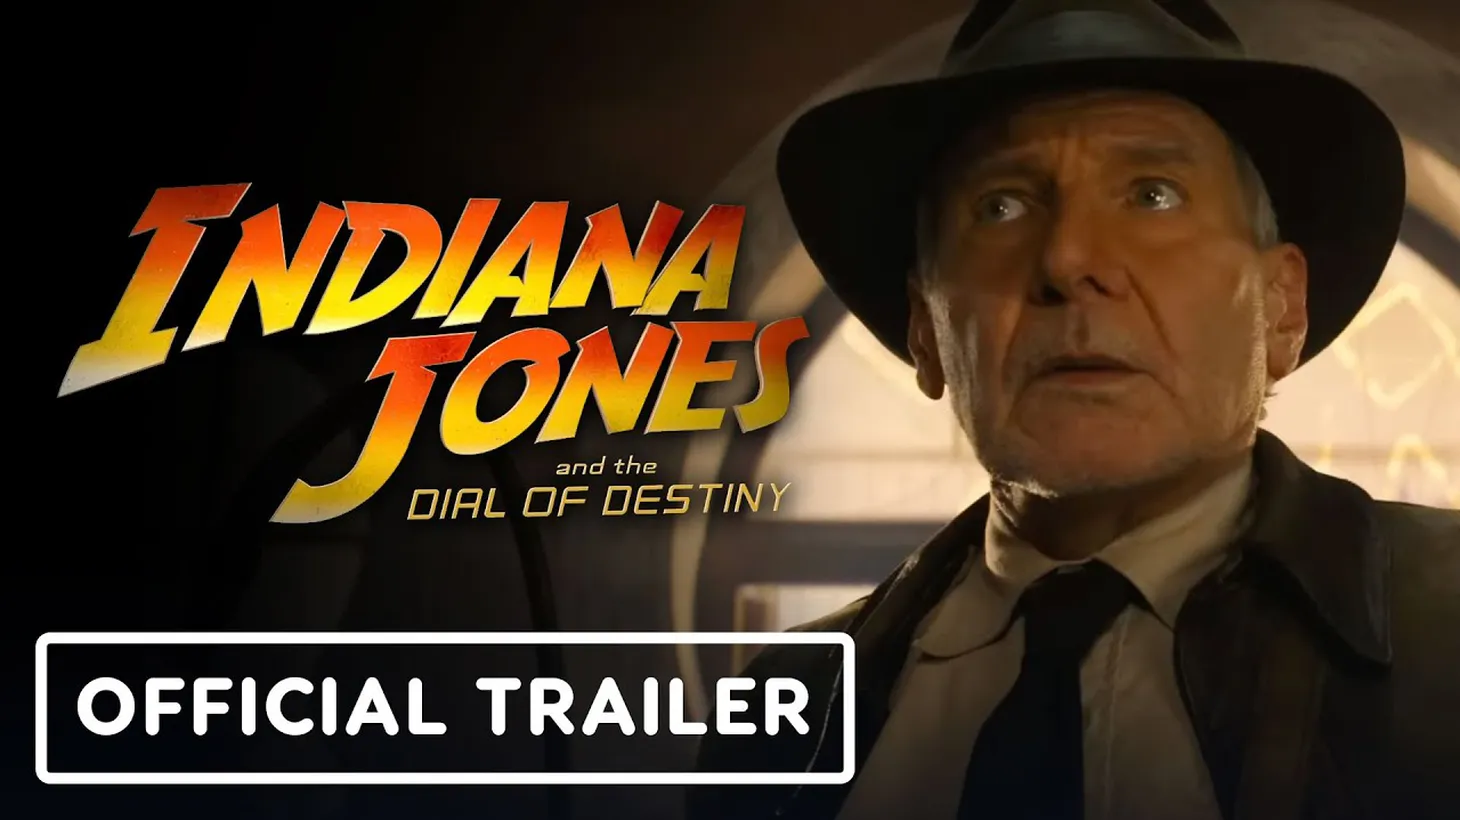 In this fifth installment of the franchise, Harrison Ford returns as the titular character who races to find an artifact that can change history.